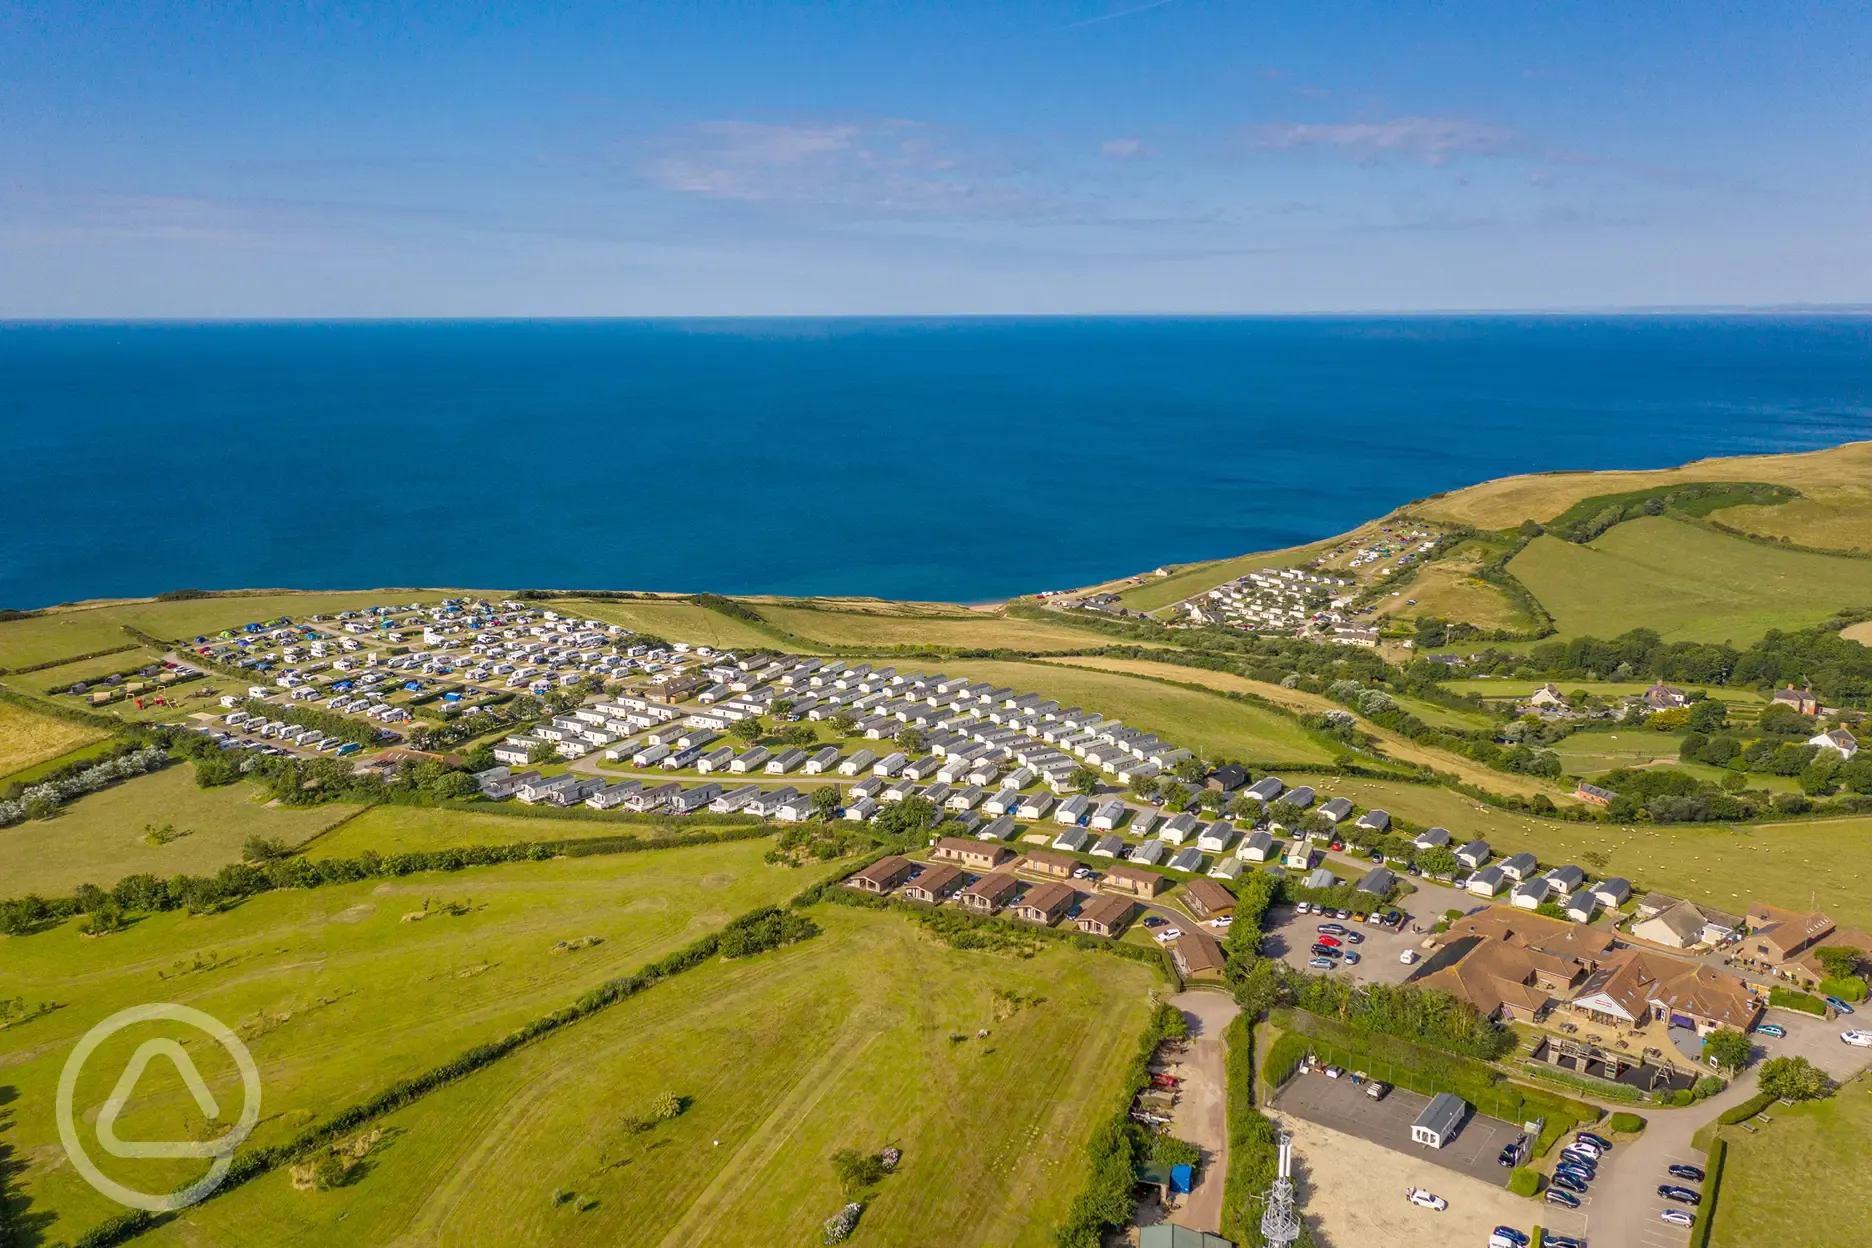 Aerial view of the campsite